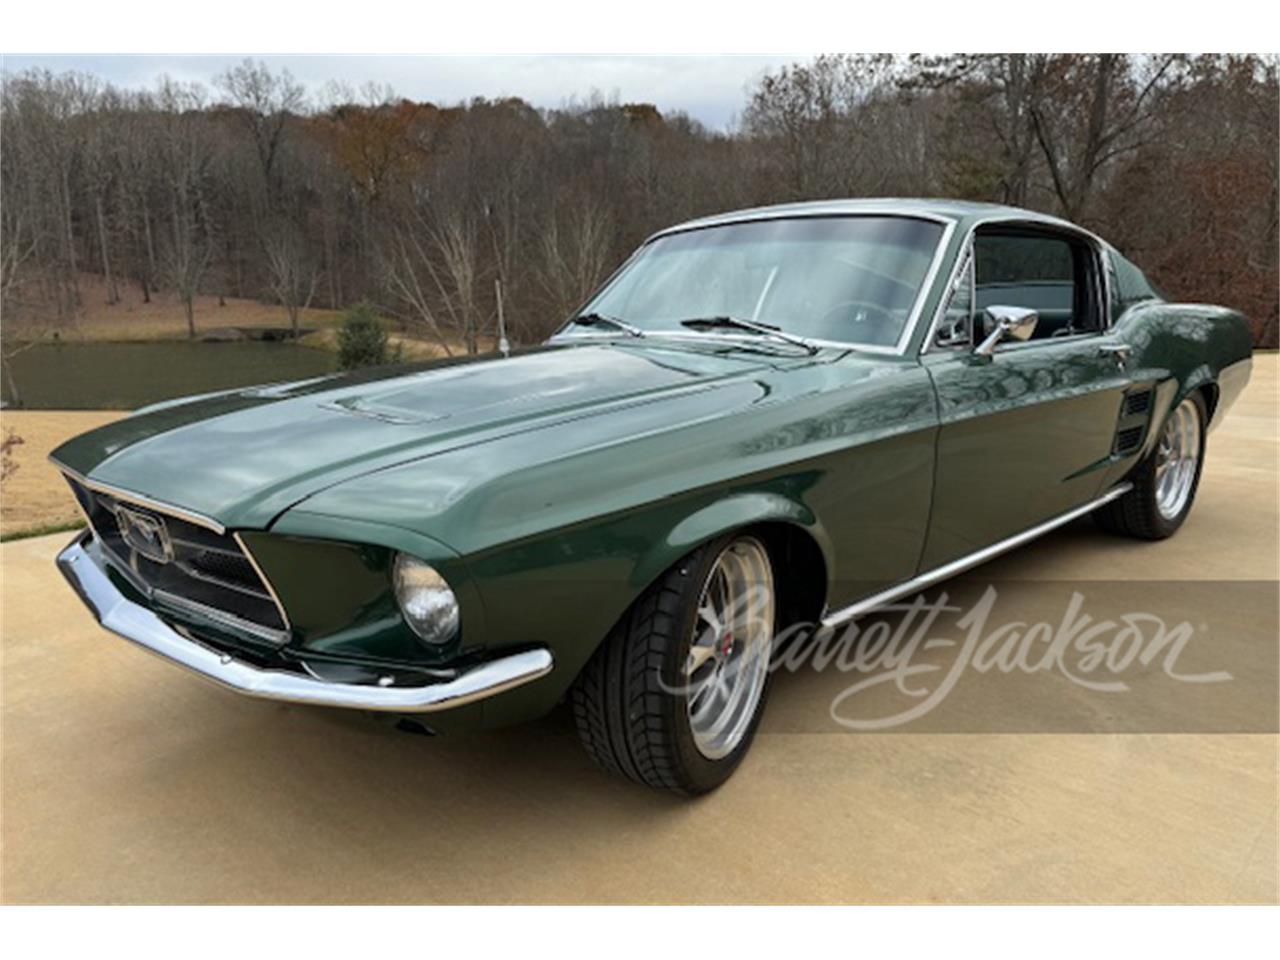 For Sale at Auction: 1967 Ford Mustang in Scottsdale, Arizona for sale in Scottsdale, AZ